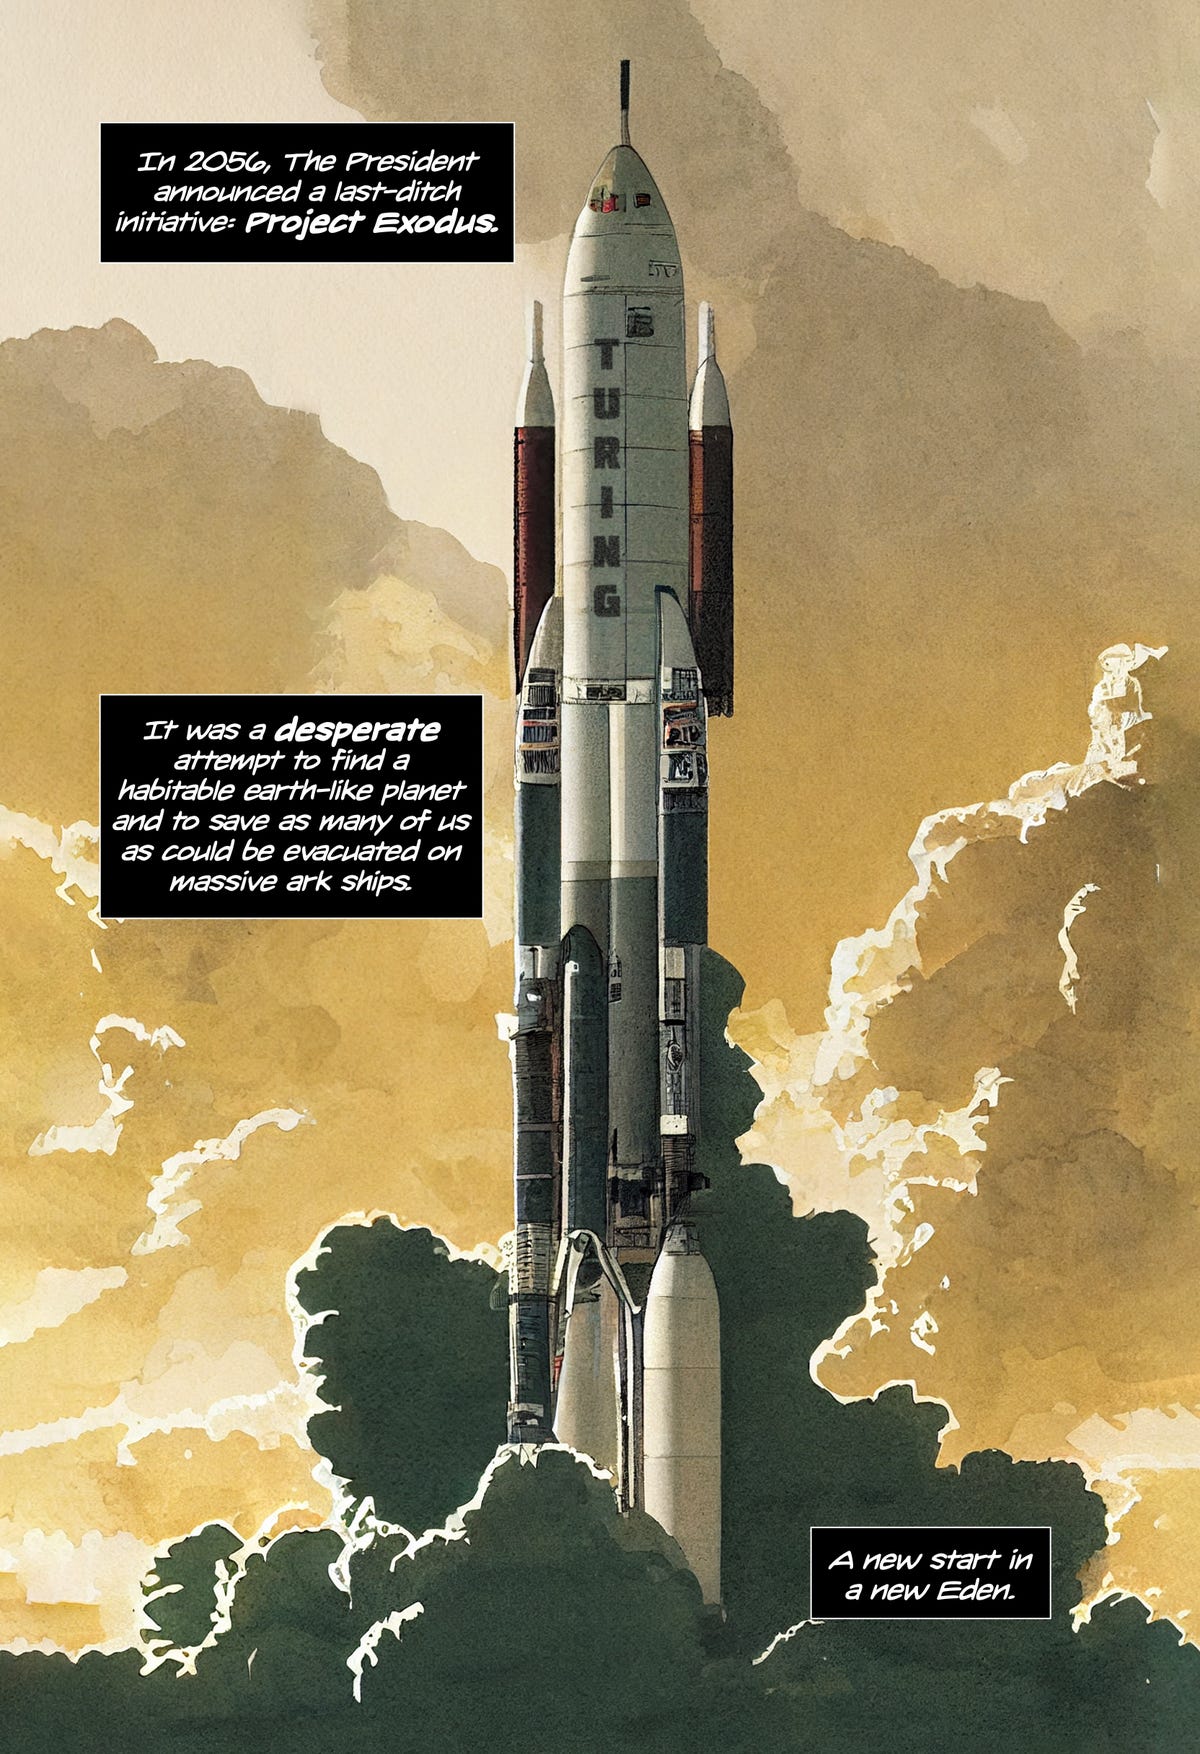 A page from The Exodus, showing rockets pointing upward